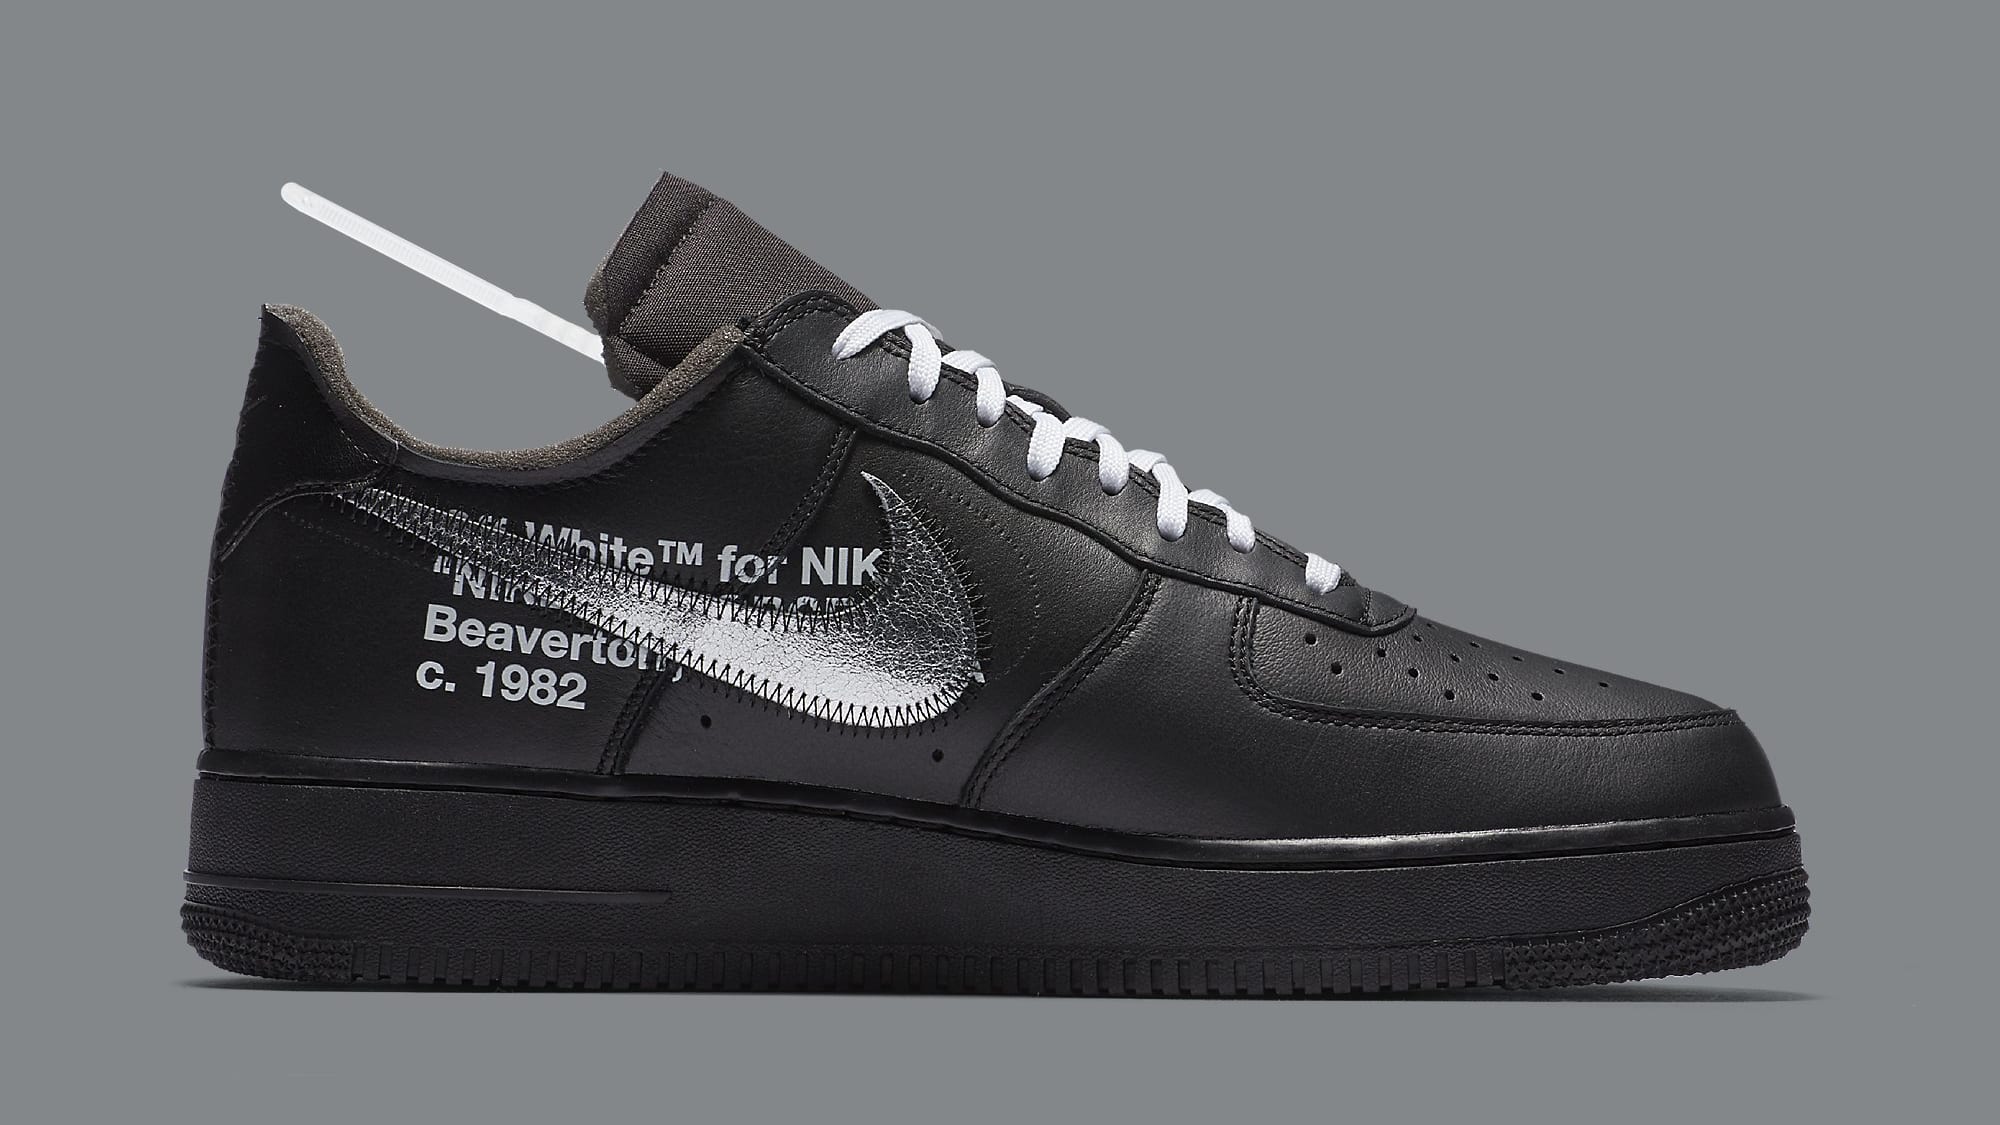 Off-White x Nike Air Force 1 "MOMA"